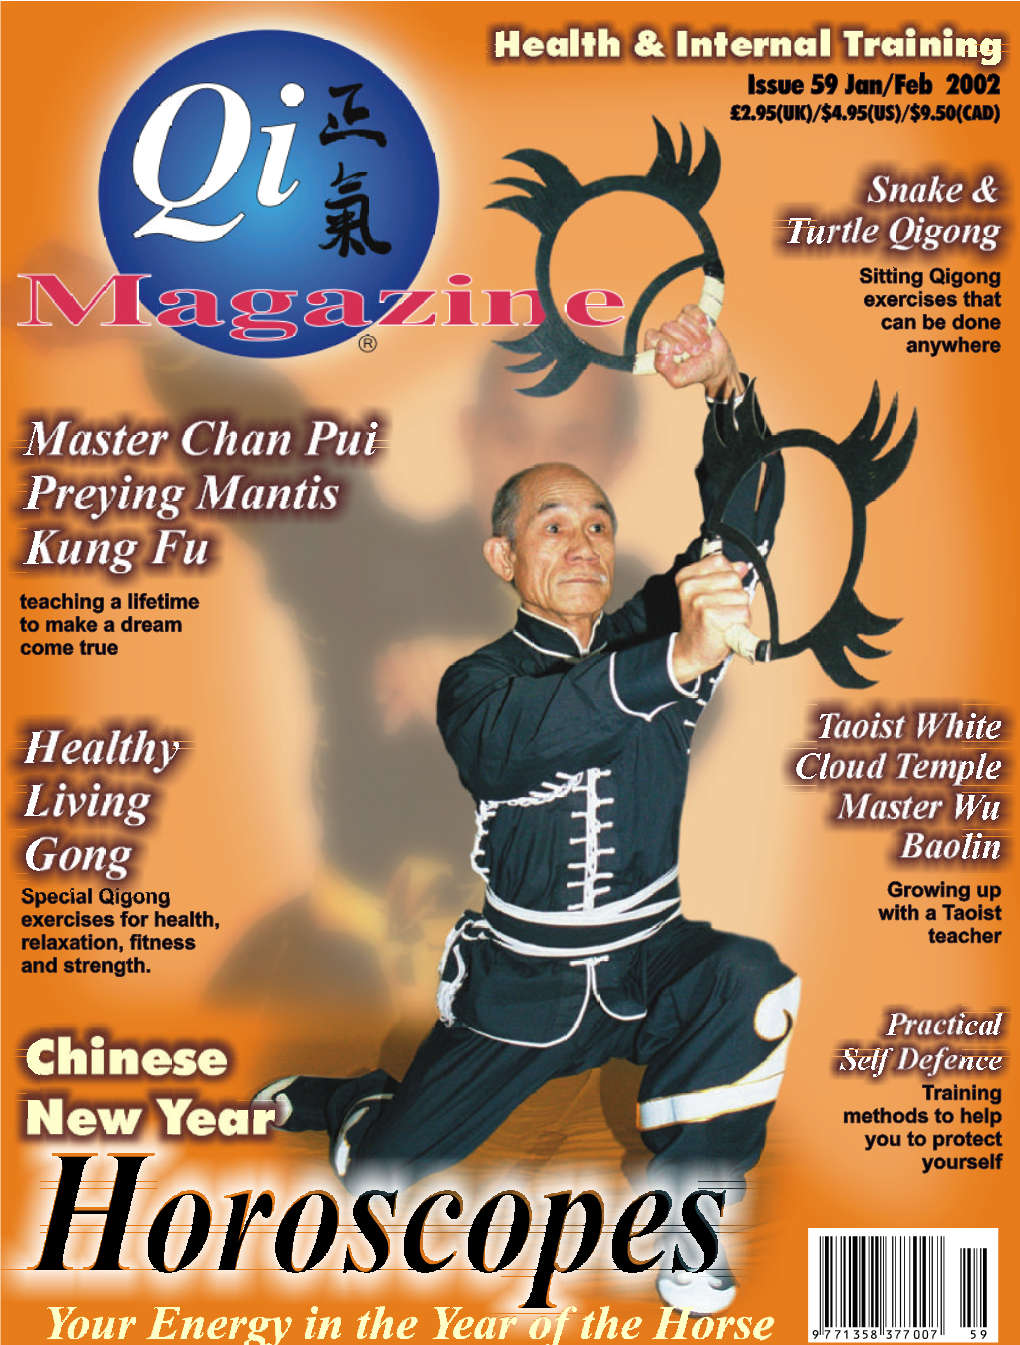 Healthy Living Gong 39 Basic Self Defence Training the Tse Qigong Centre Has Many Different Types of Qigong